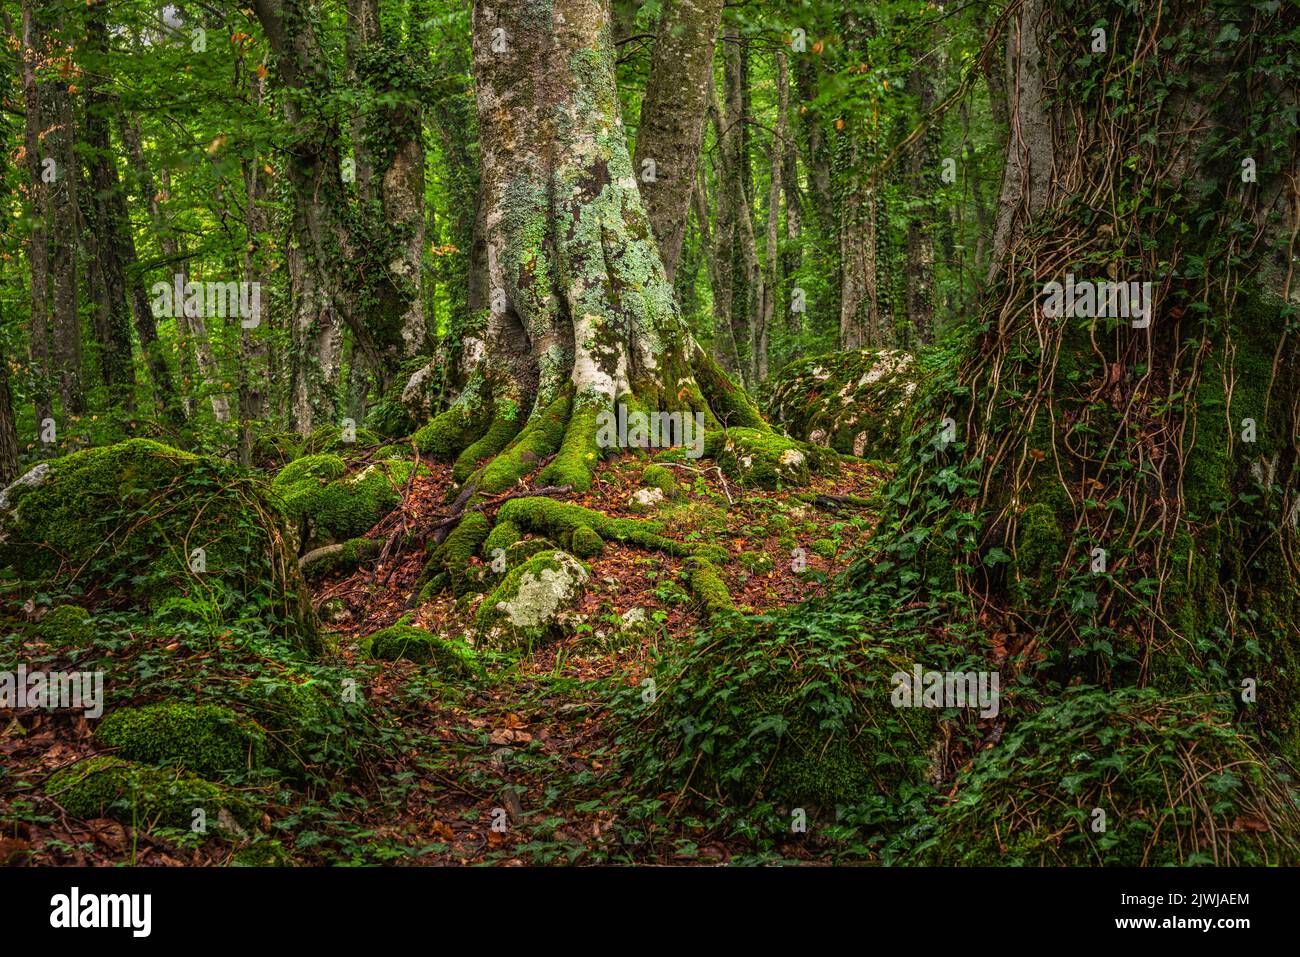 Beech trees with moss and fallen leaves grow among the rocks emerging from the ground. Bosco di Sant'Antonio Nature Reserve, Pescocostanzo, Abruzzo Stock Photo